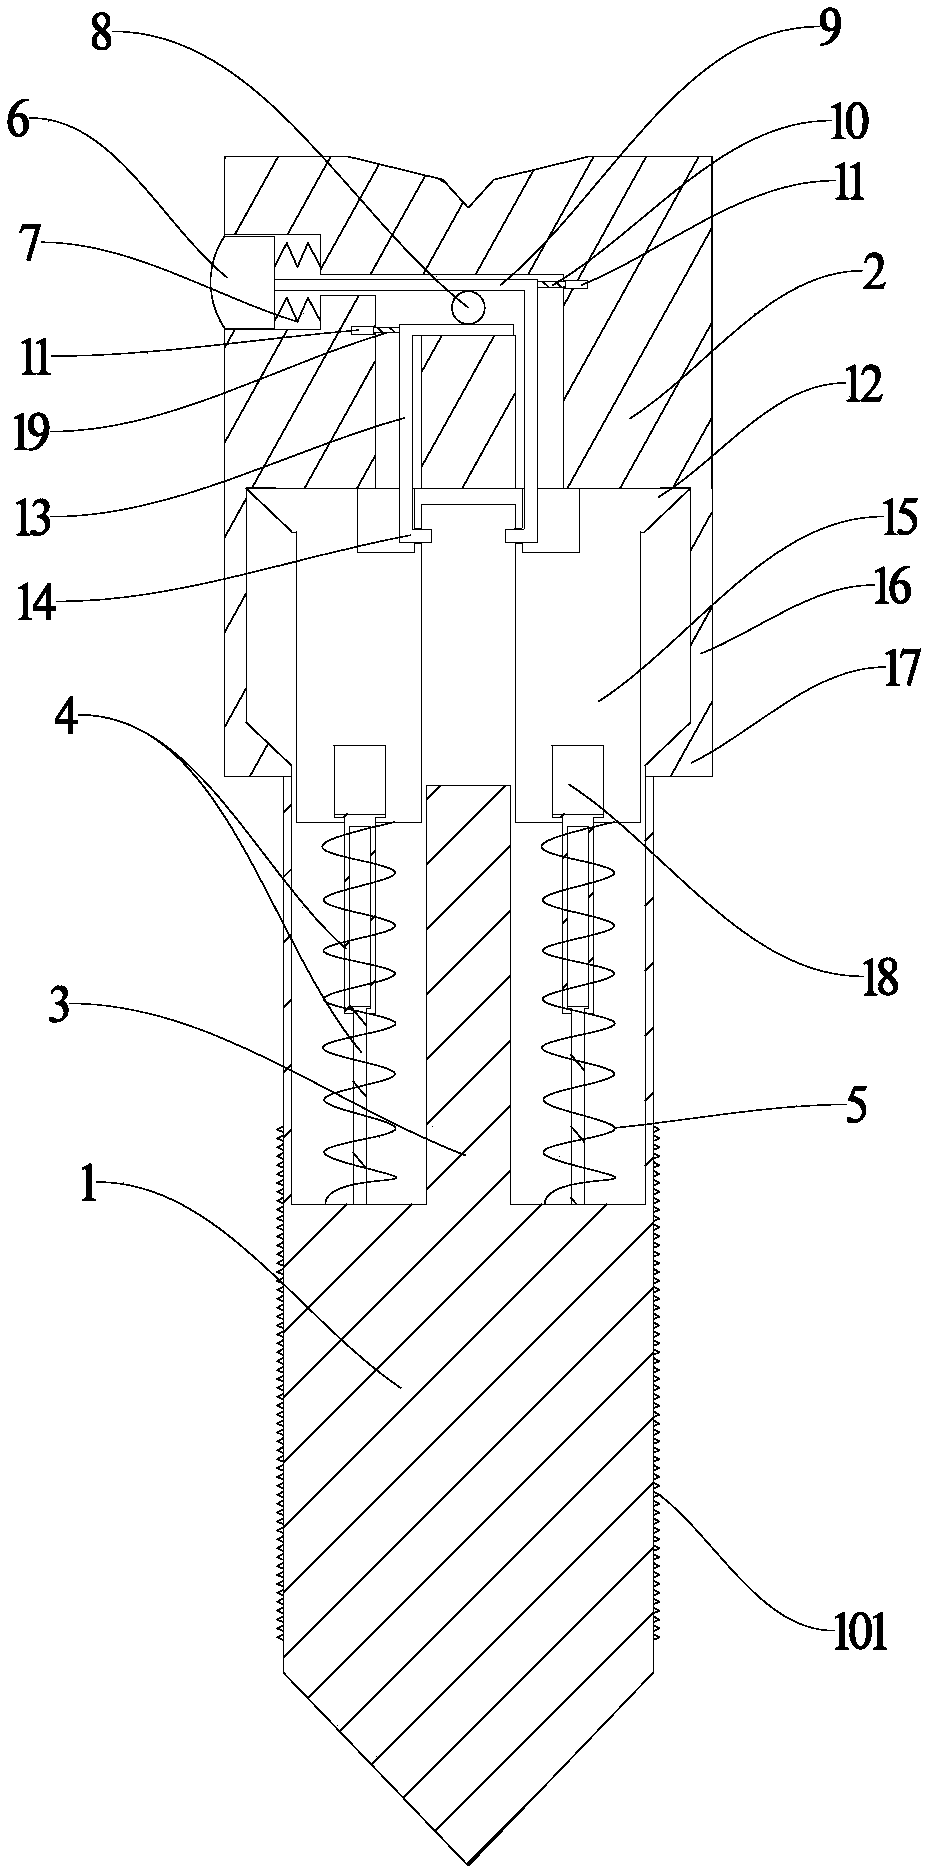 Anti-derotation screw capable of cooperating with hole depth